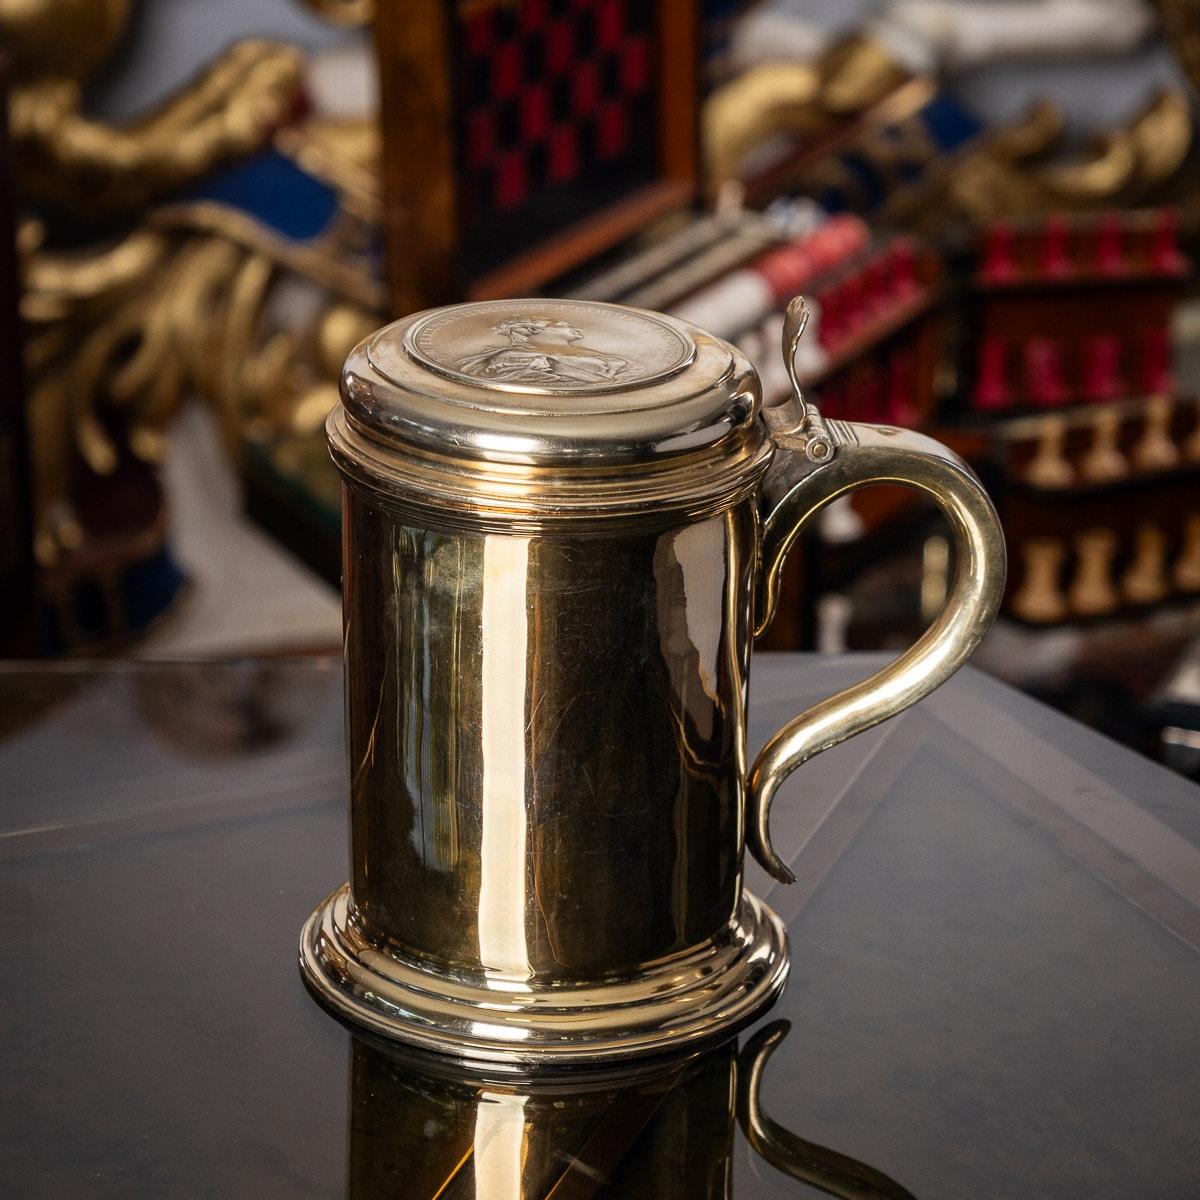 Antique 18th century Imperial Russian solid silver-gilt impressive lidded tankard, parcel gilt, of traditional tapering form on a spreading foot, the sides chased with gilt putto masks and trailing foliage and scrolls on textured silver ground,